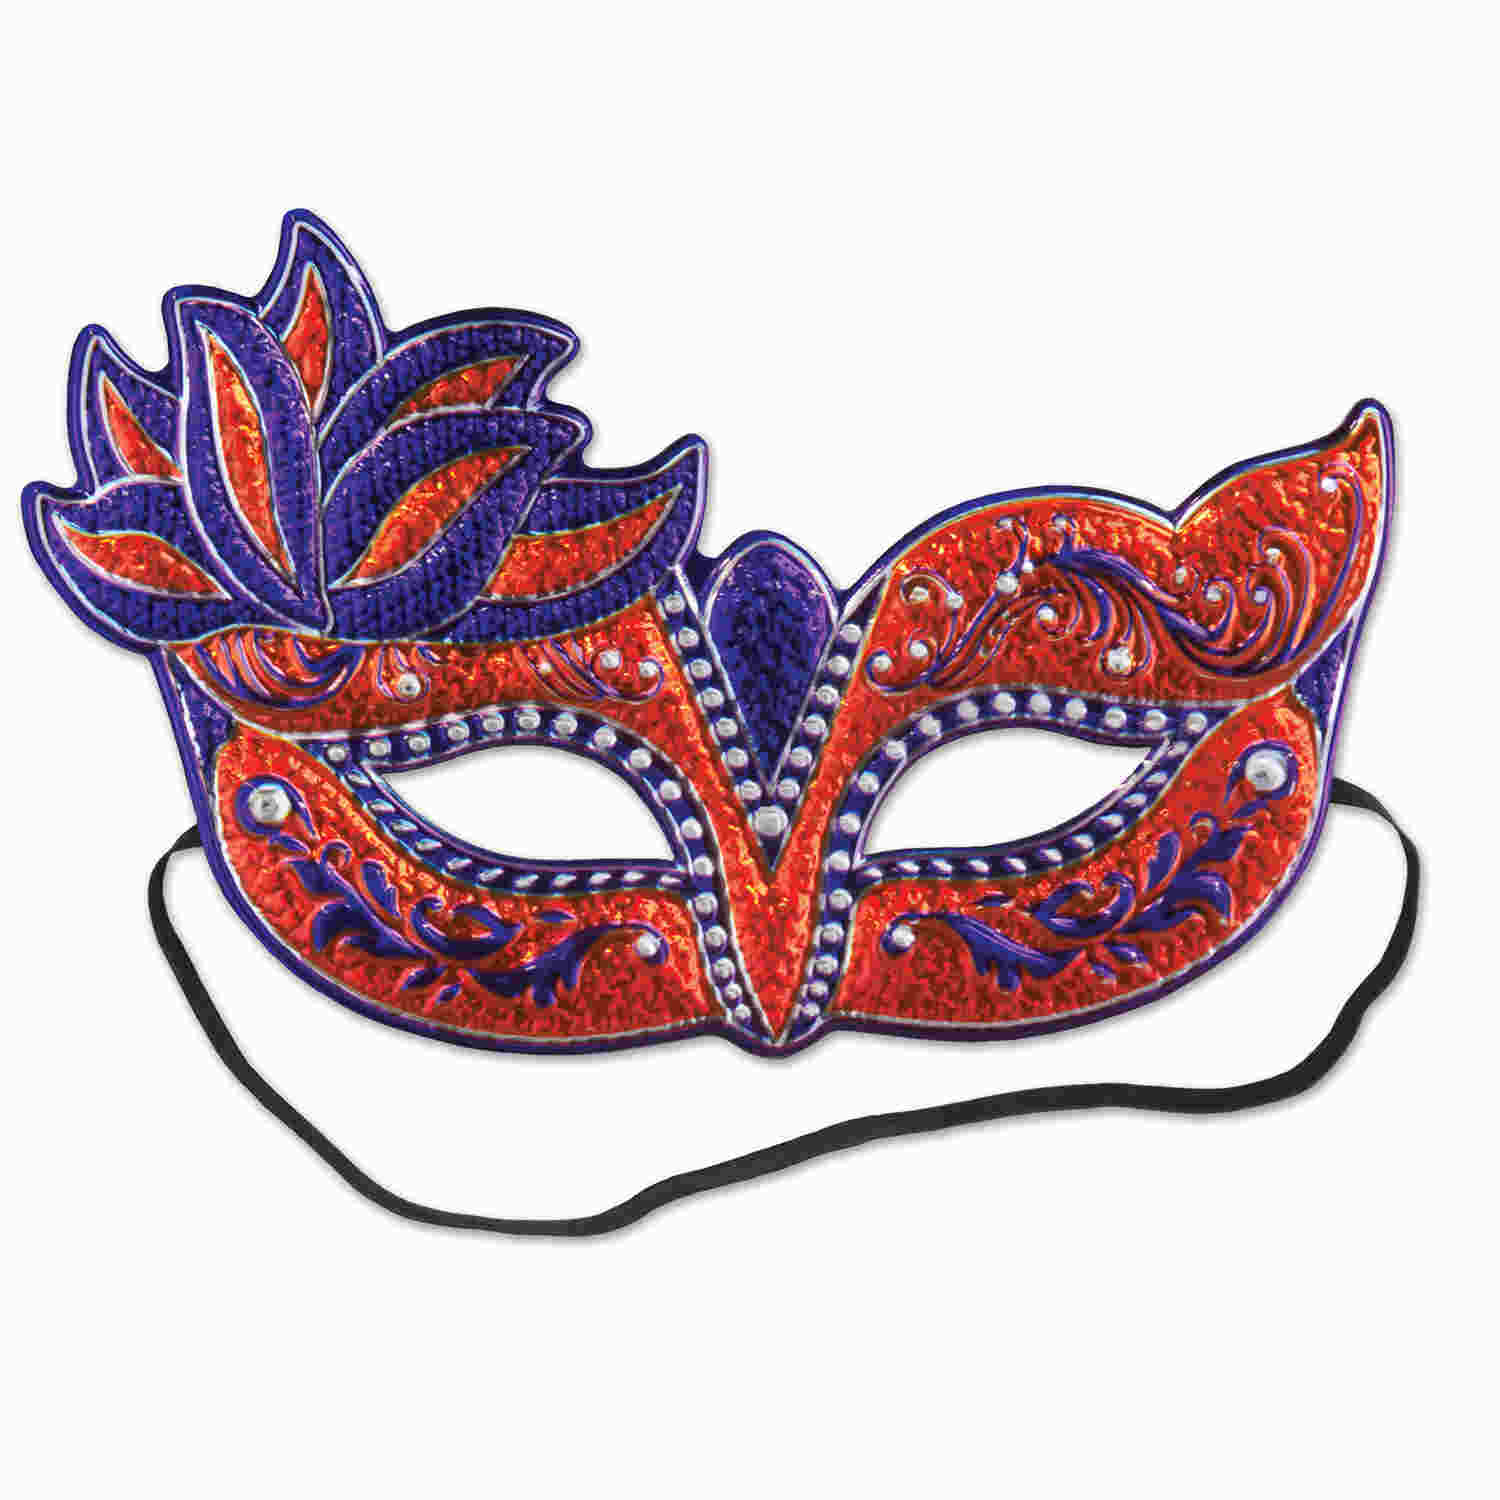 Red and purple intricate styled Mardi Gras mask. 